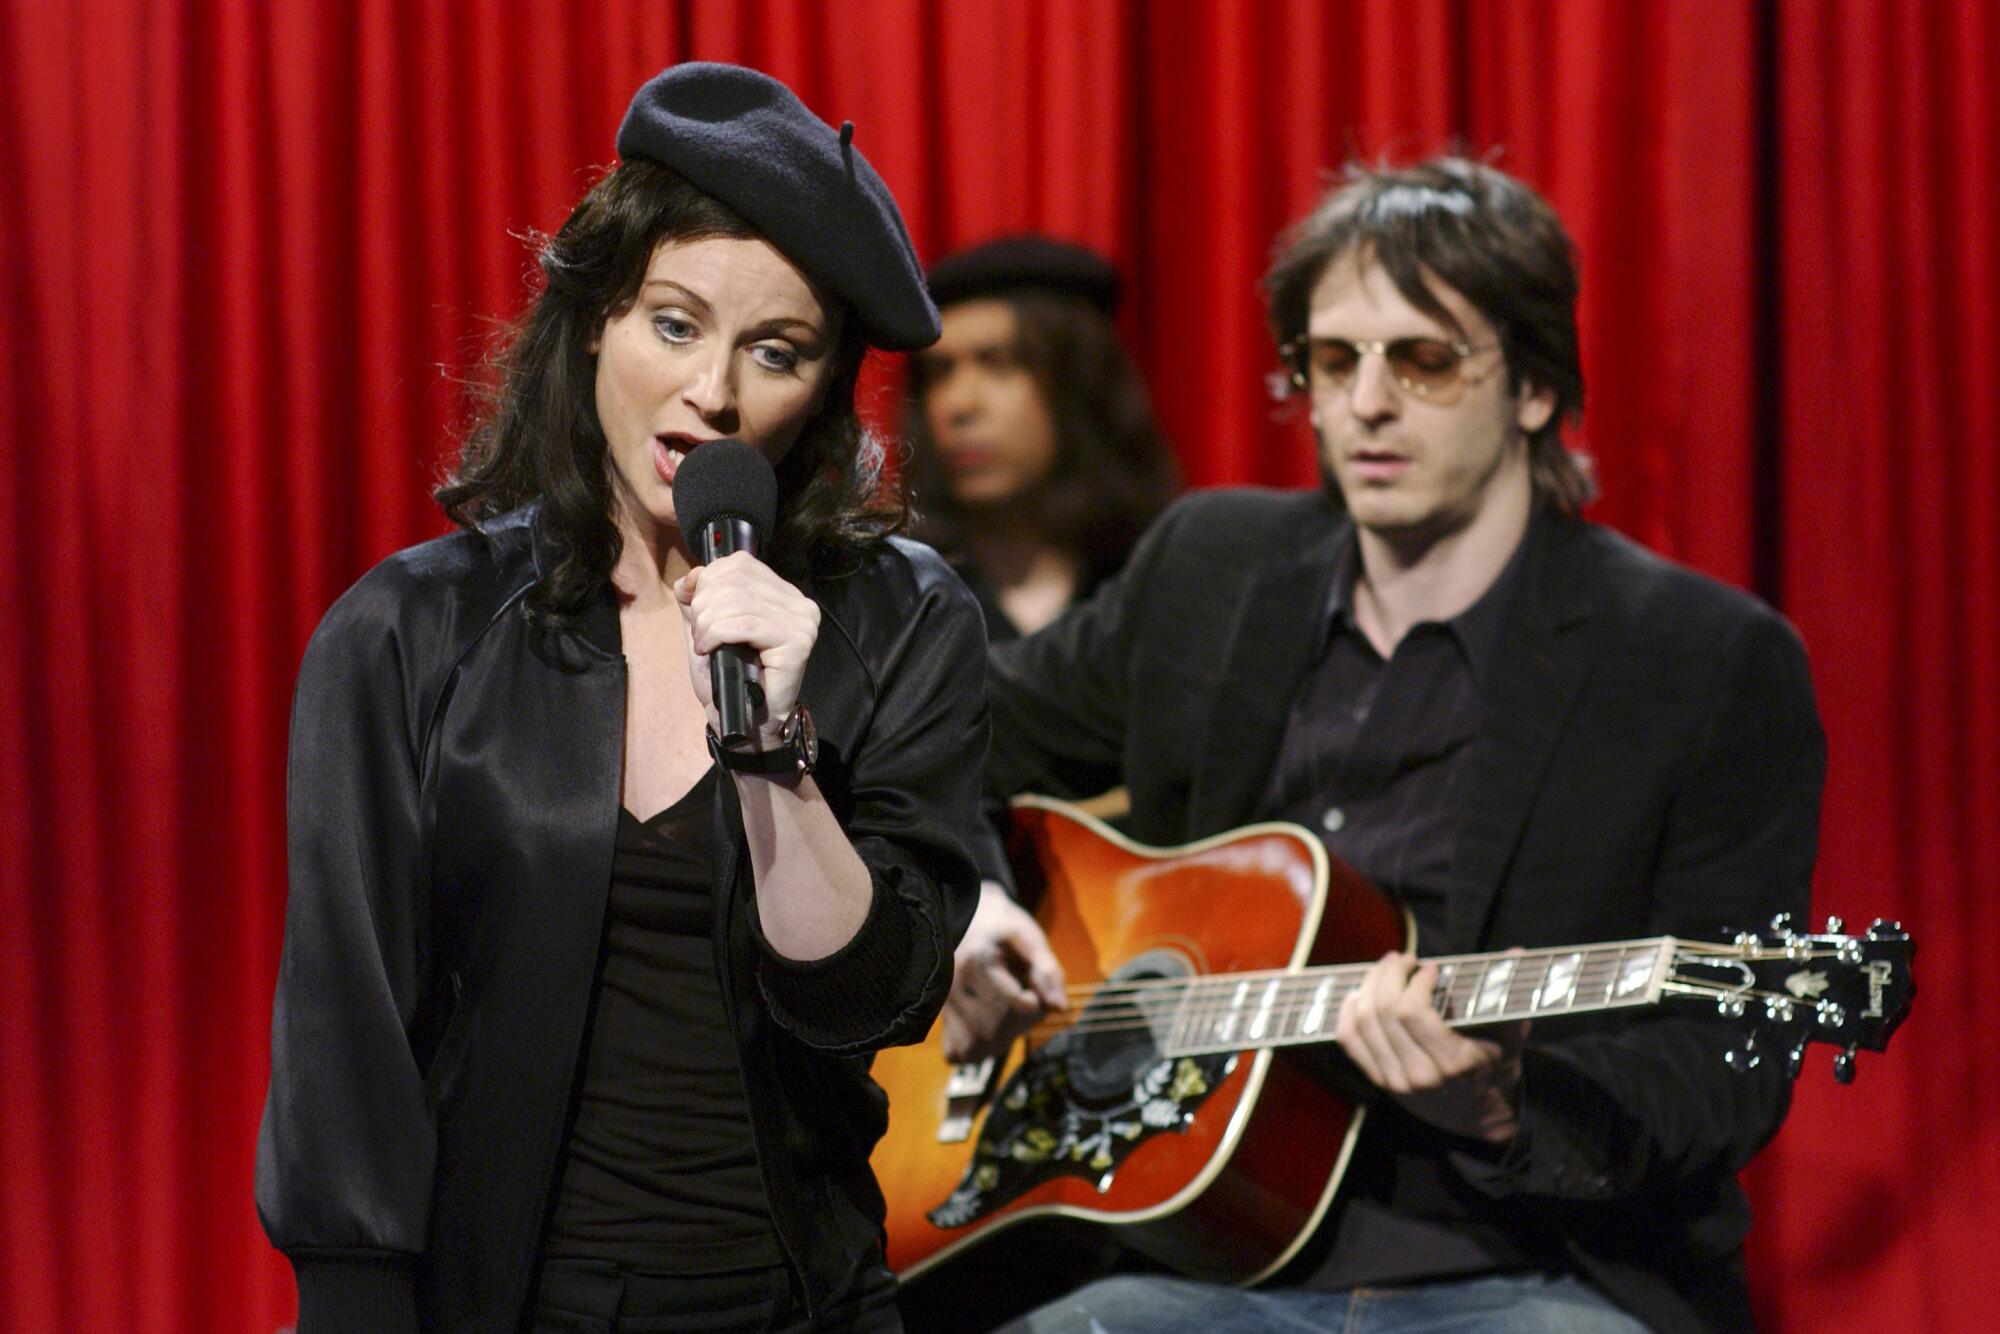 A singer (Amy Poehler as Madonna) dressed in black with a black beret in front of a guitarist (Dr. Luke) wearing sunglasses.